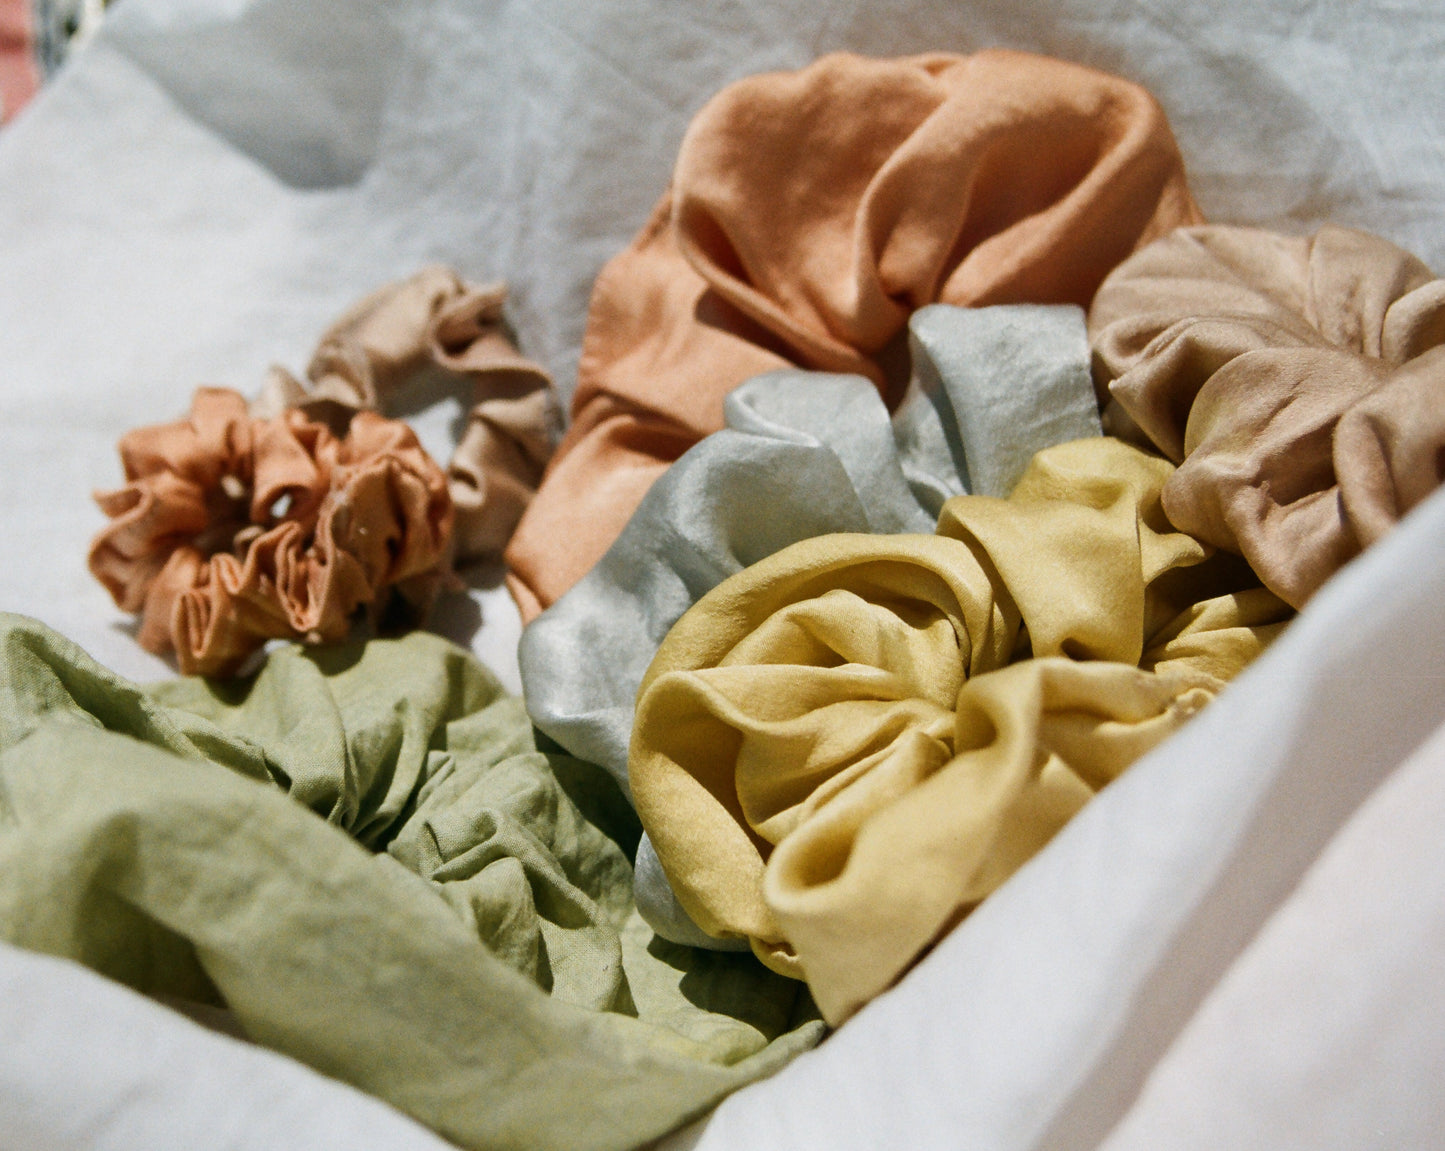 A bundle of assorted naturally dyed silk scrunchies are being displayed. There is a mint green silk scrunchie, light blue silk scrunchie, buttery yellow silk scrunchie, peach and light pink silk scrunchie. All silk scrunchies are naturally dyed.